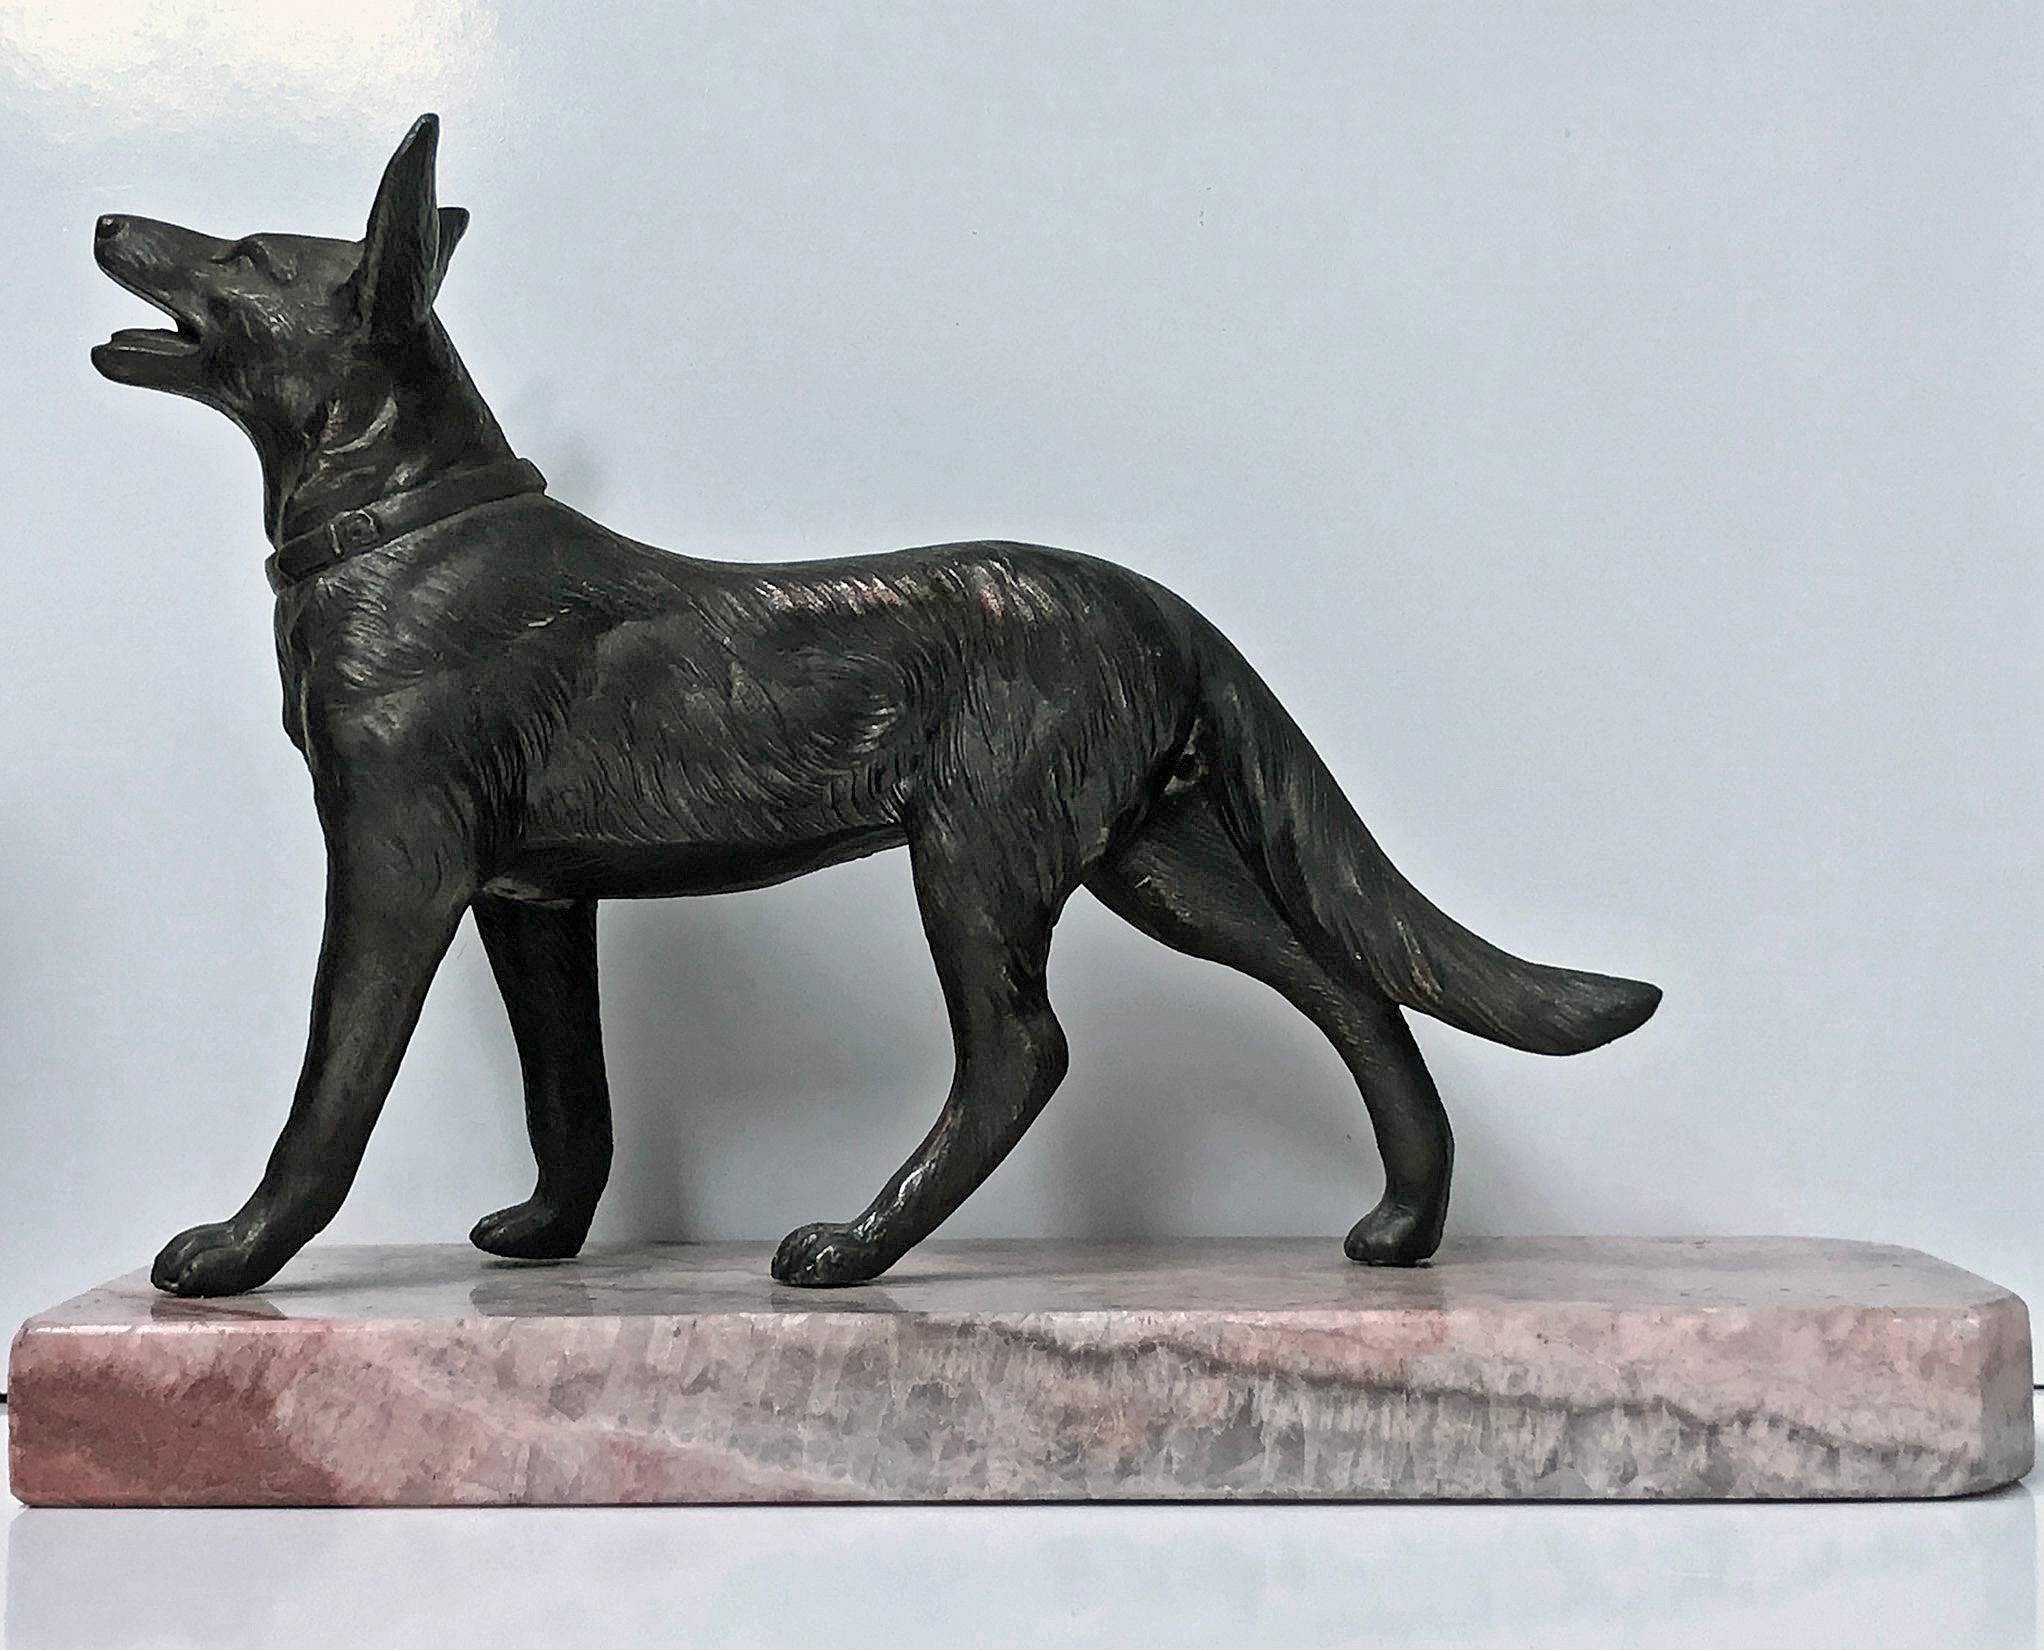 Pair of Art Deco bronze dog bookends, France, circa 1930. Each depicting an Alsatian dog on marble base. The standing Alsatian of realistic model form, textured body; surmounted on mottled light brown and cream overtone base. Each overall